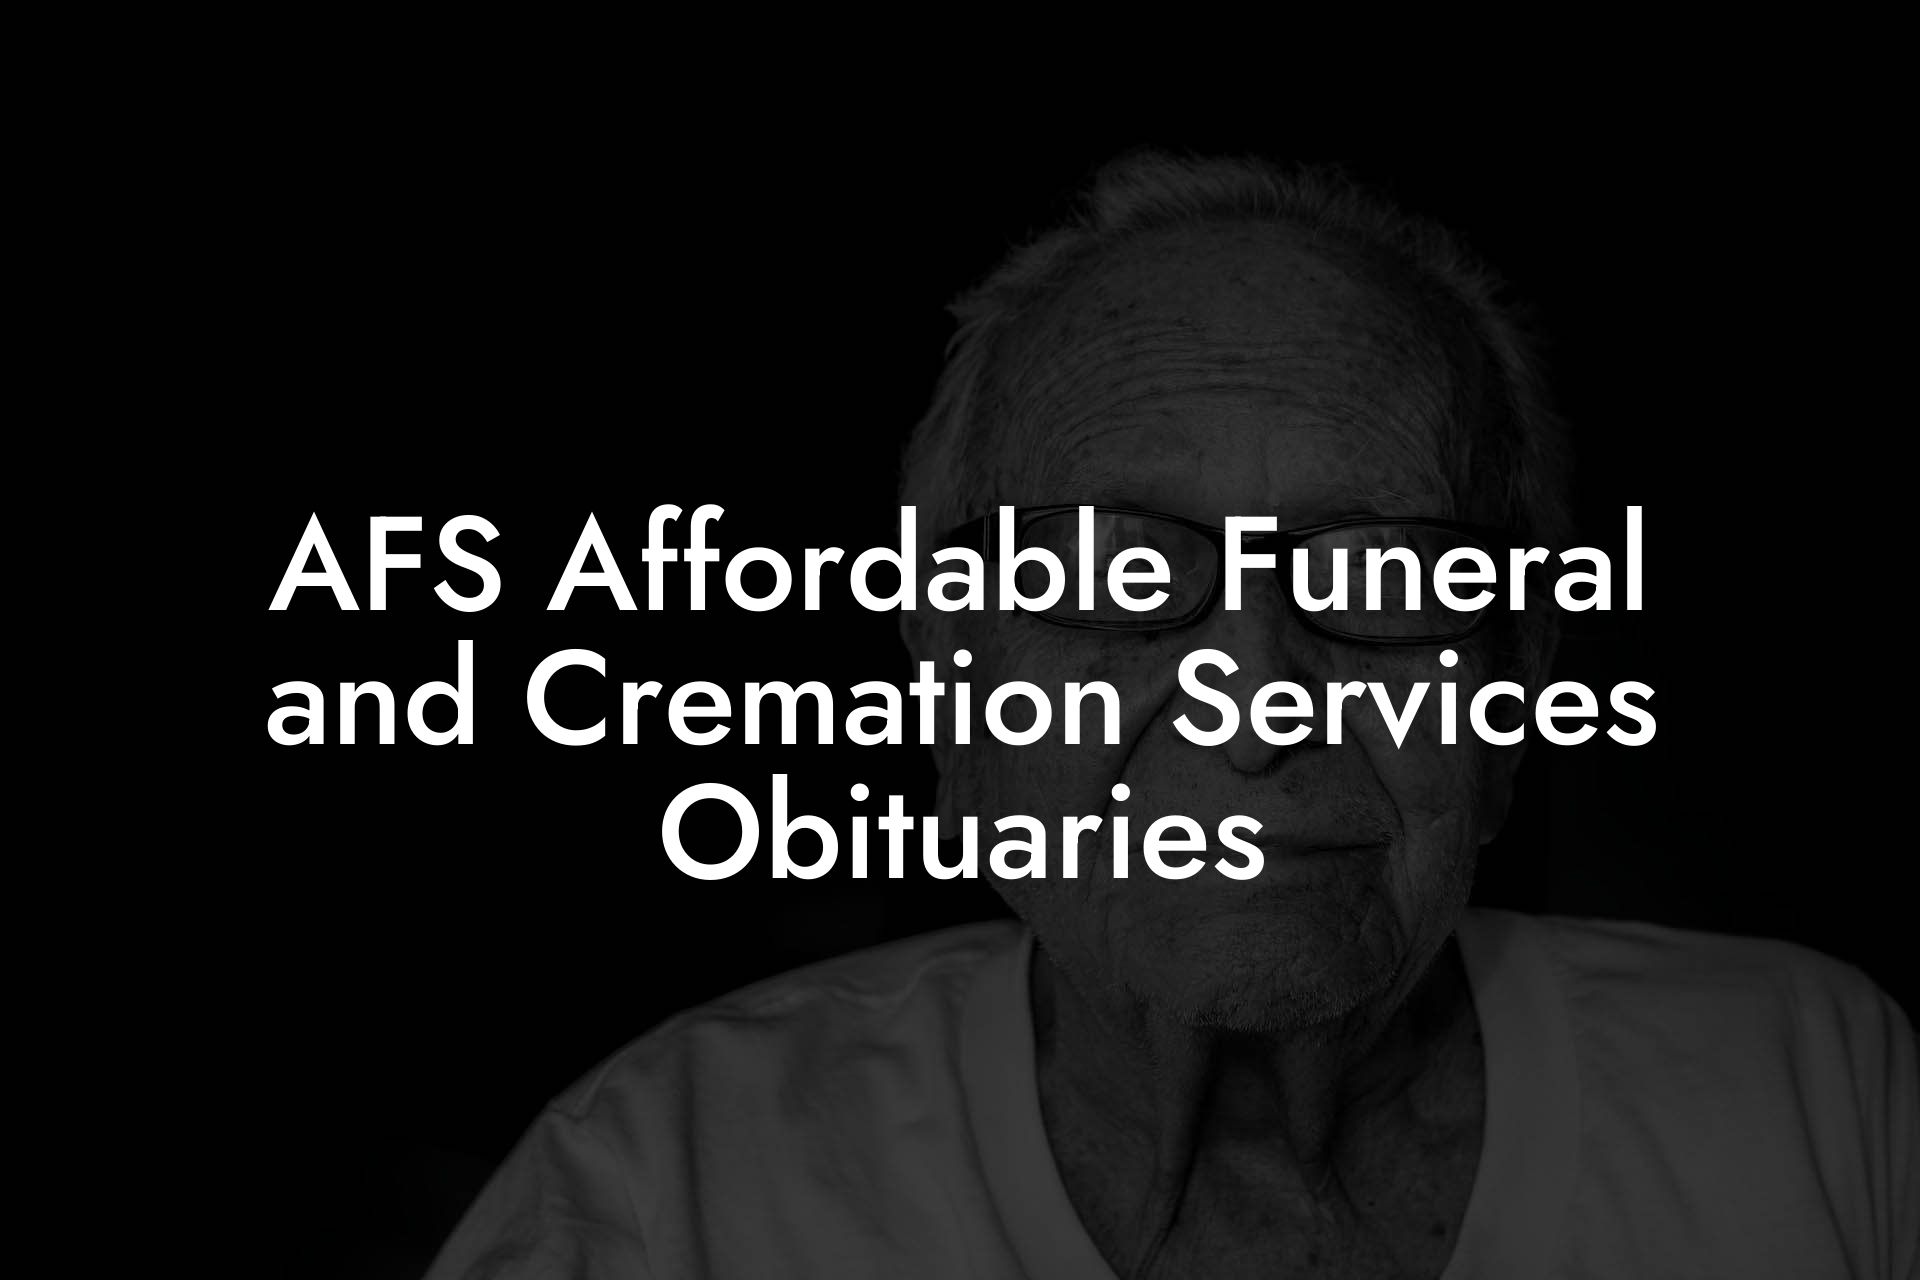 AFS Affordable Funeral and Cremation Services Obituaries